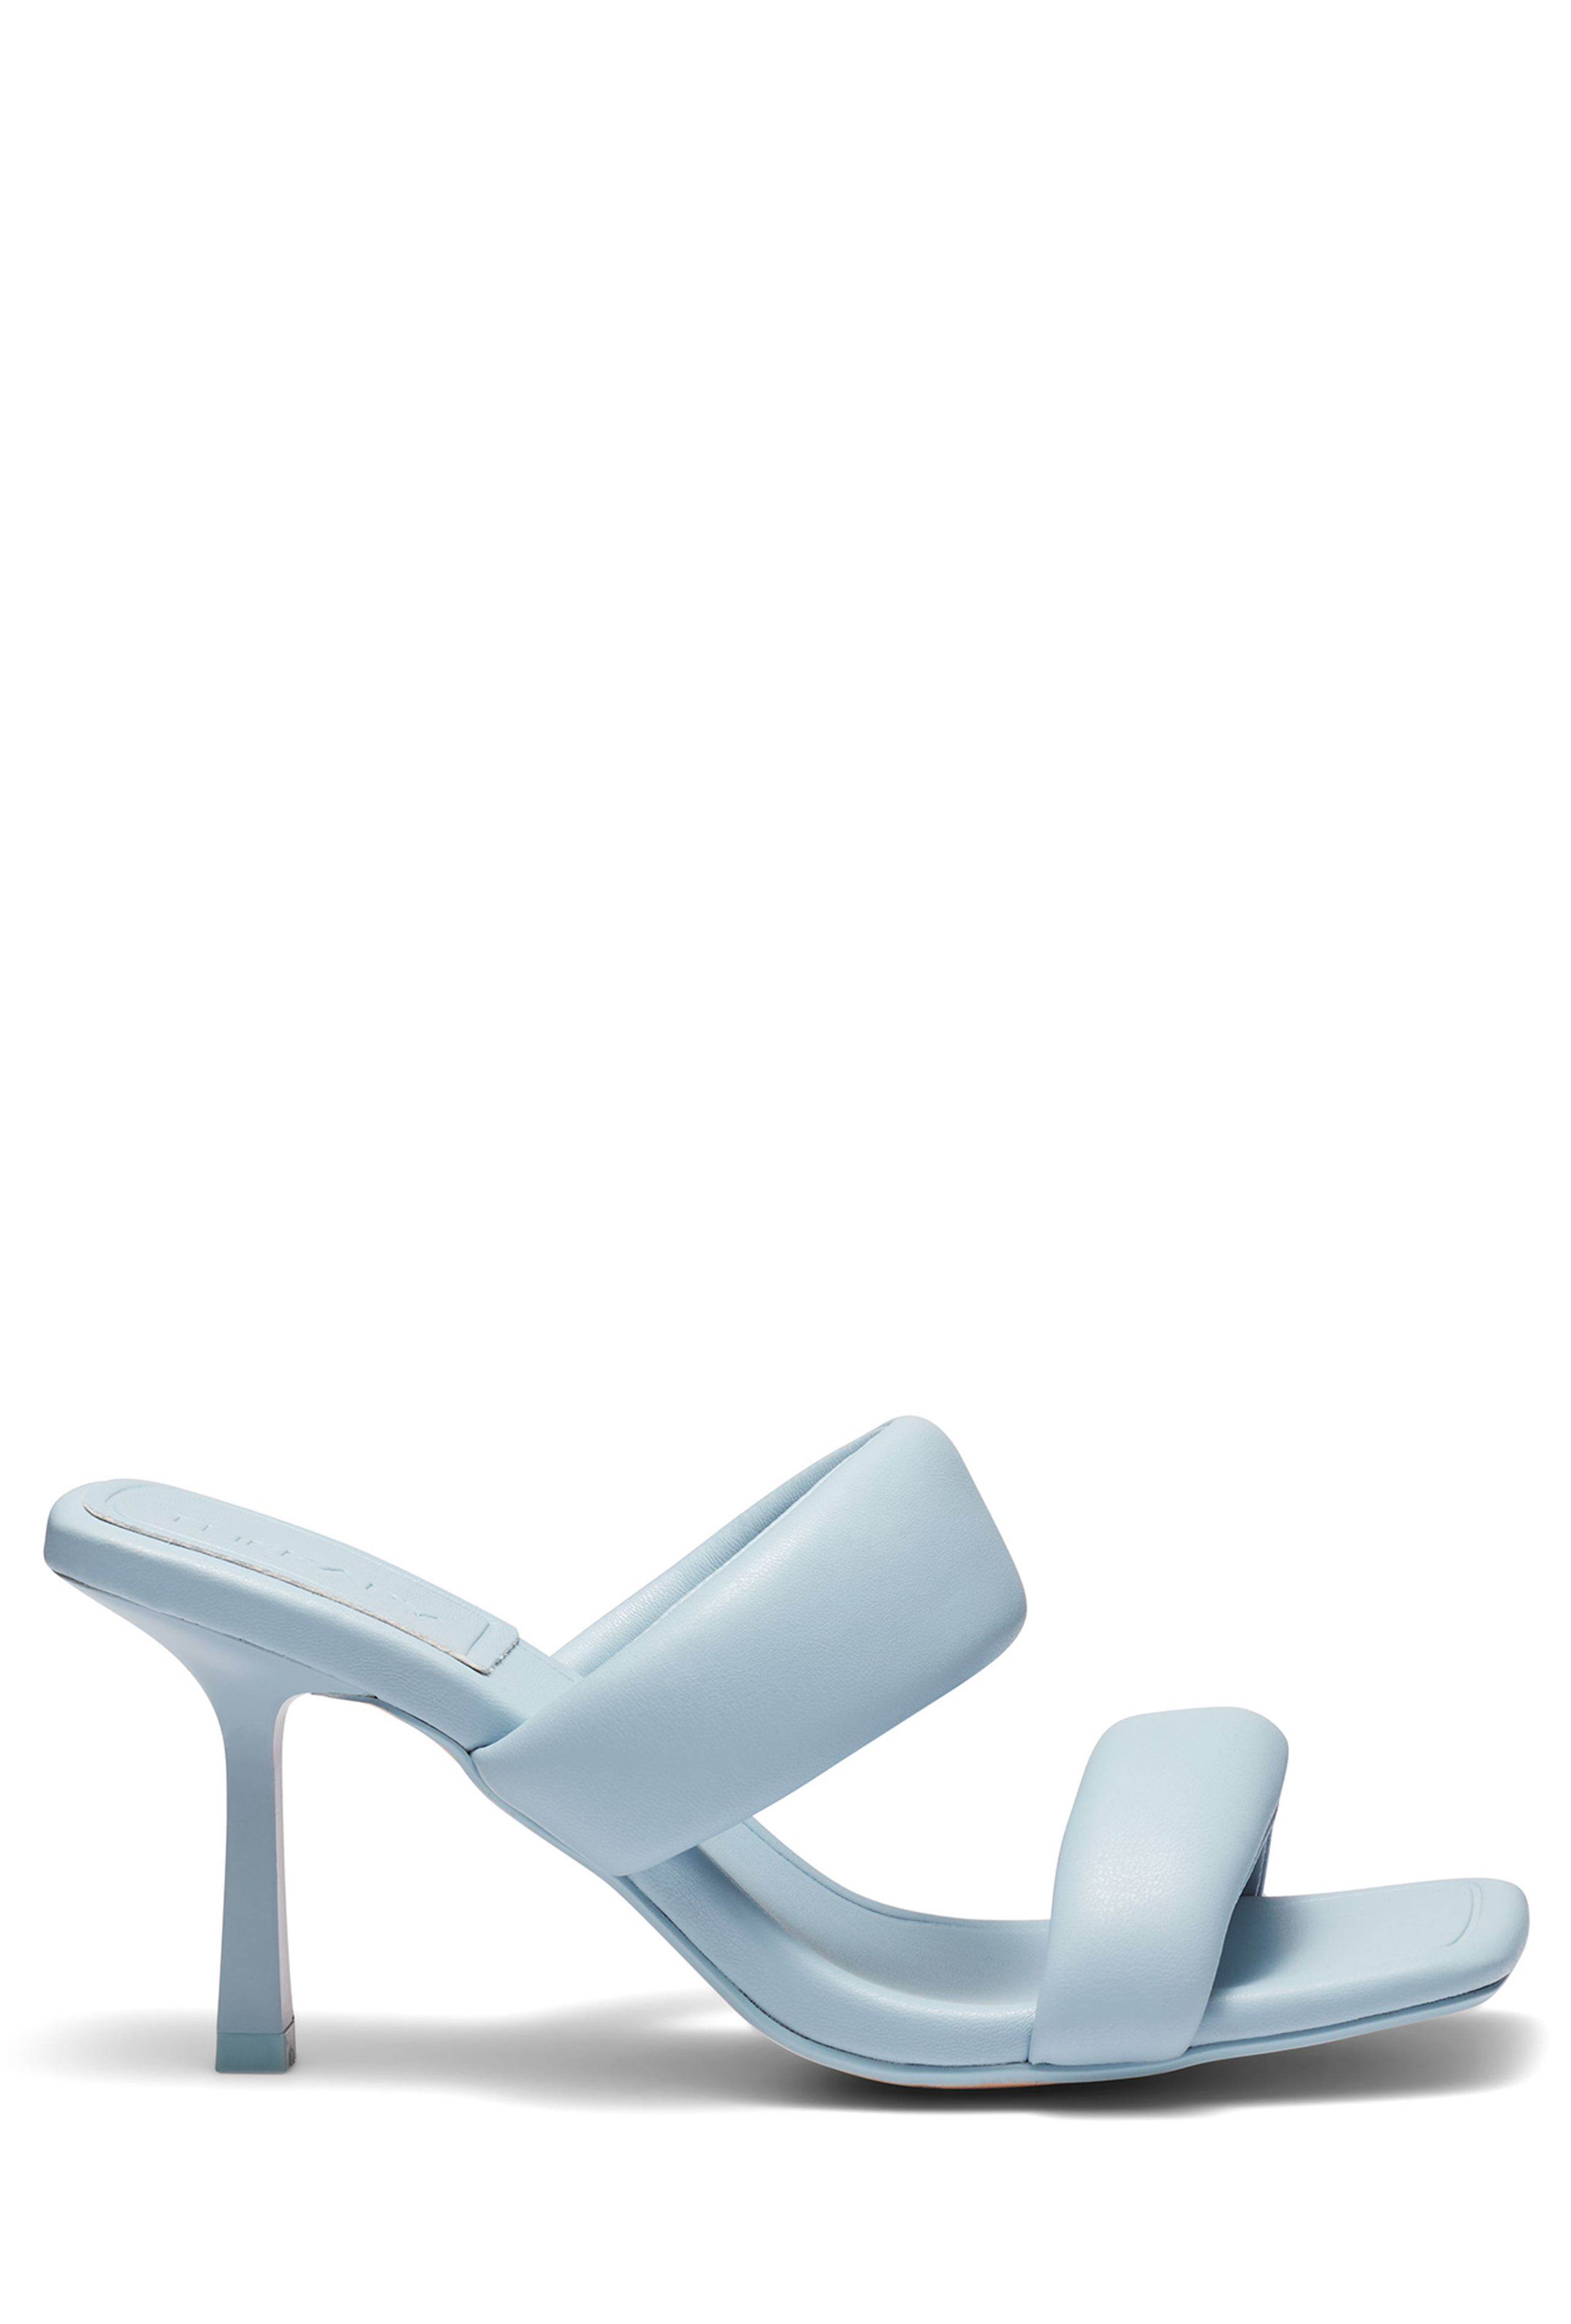 THERAPY Dolla Heels Shoes - Cement